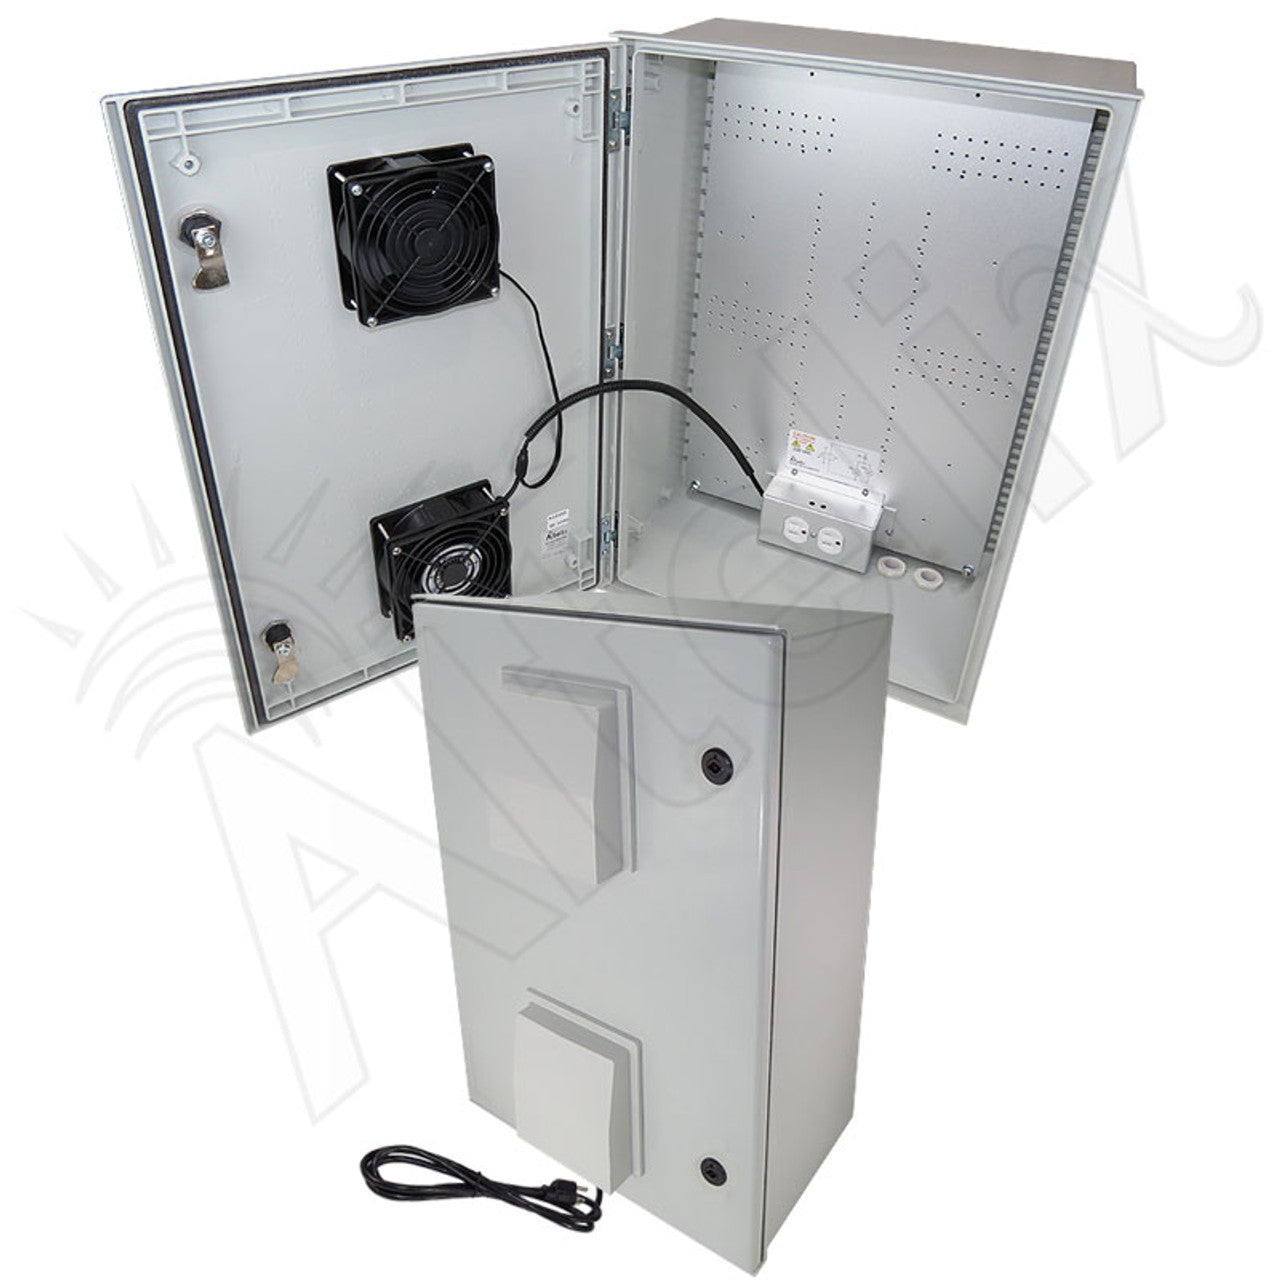 Altelix Vented Fiberglass Weatherproof NEMA Enclosure with 120 VAC Outlets, Power Cord, 200W Heater and 85°F Turn-On Cooling Fan-5